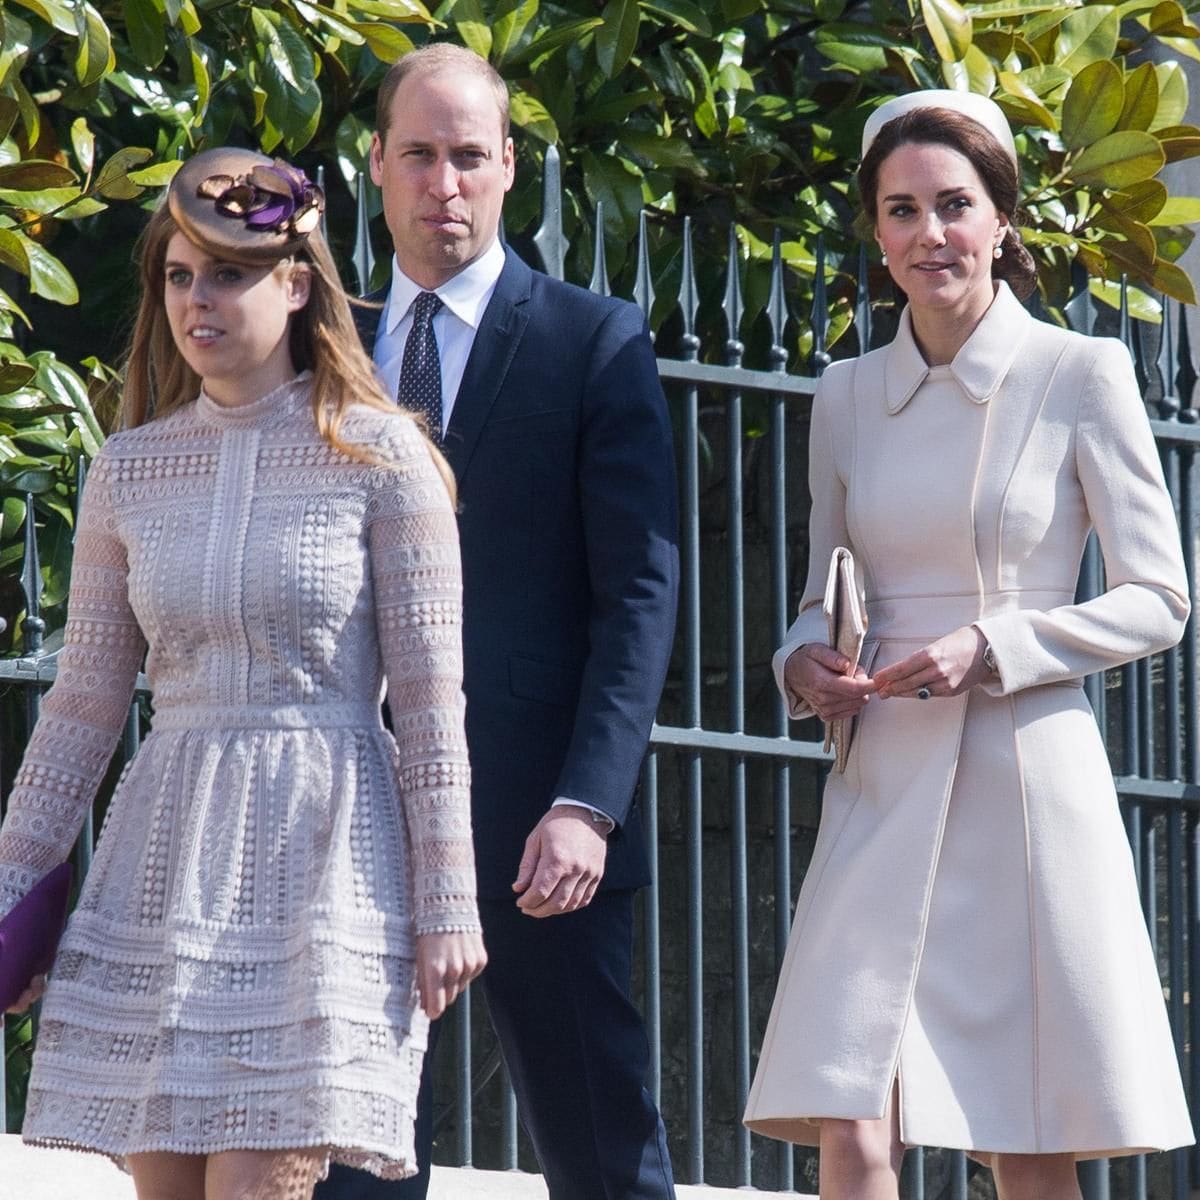 The Cambridge kids and Princess Beatrice's daughter recently spent time with their great grandmother, Queen Elizabeth